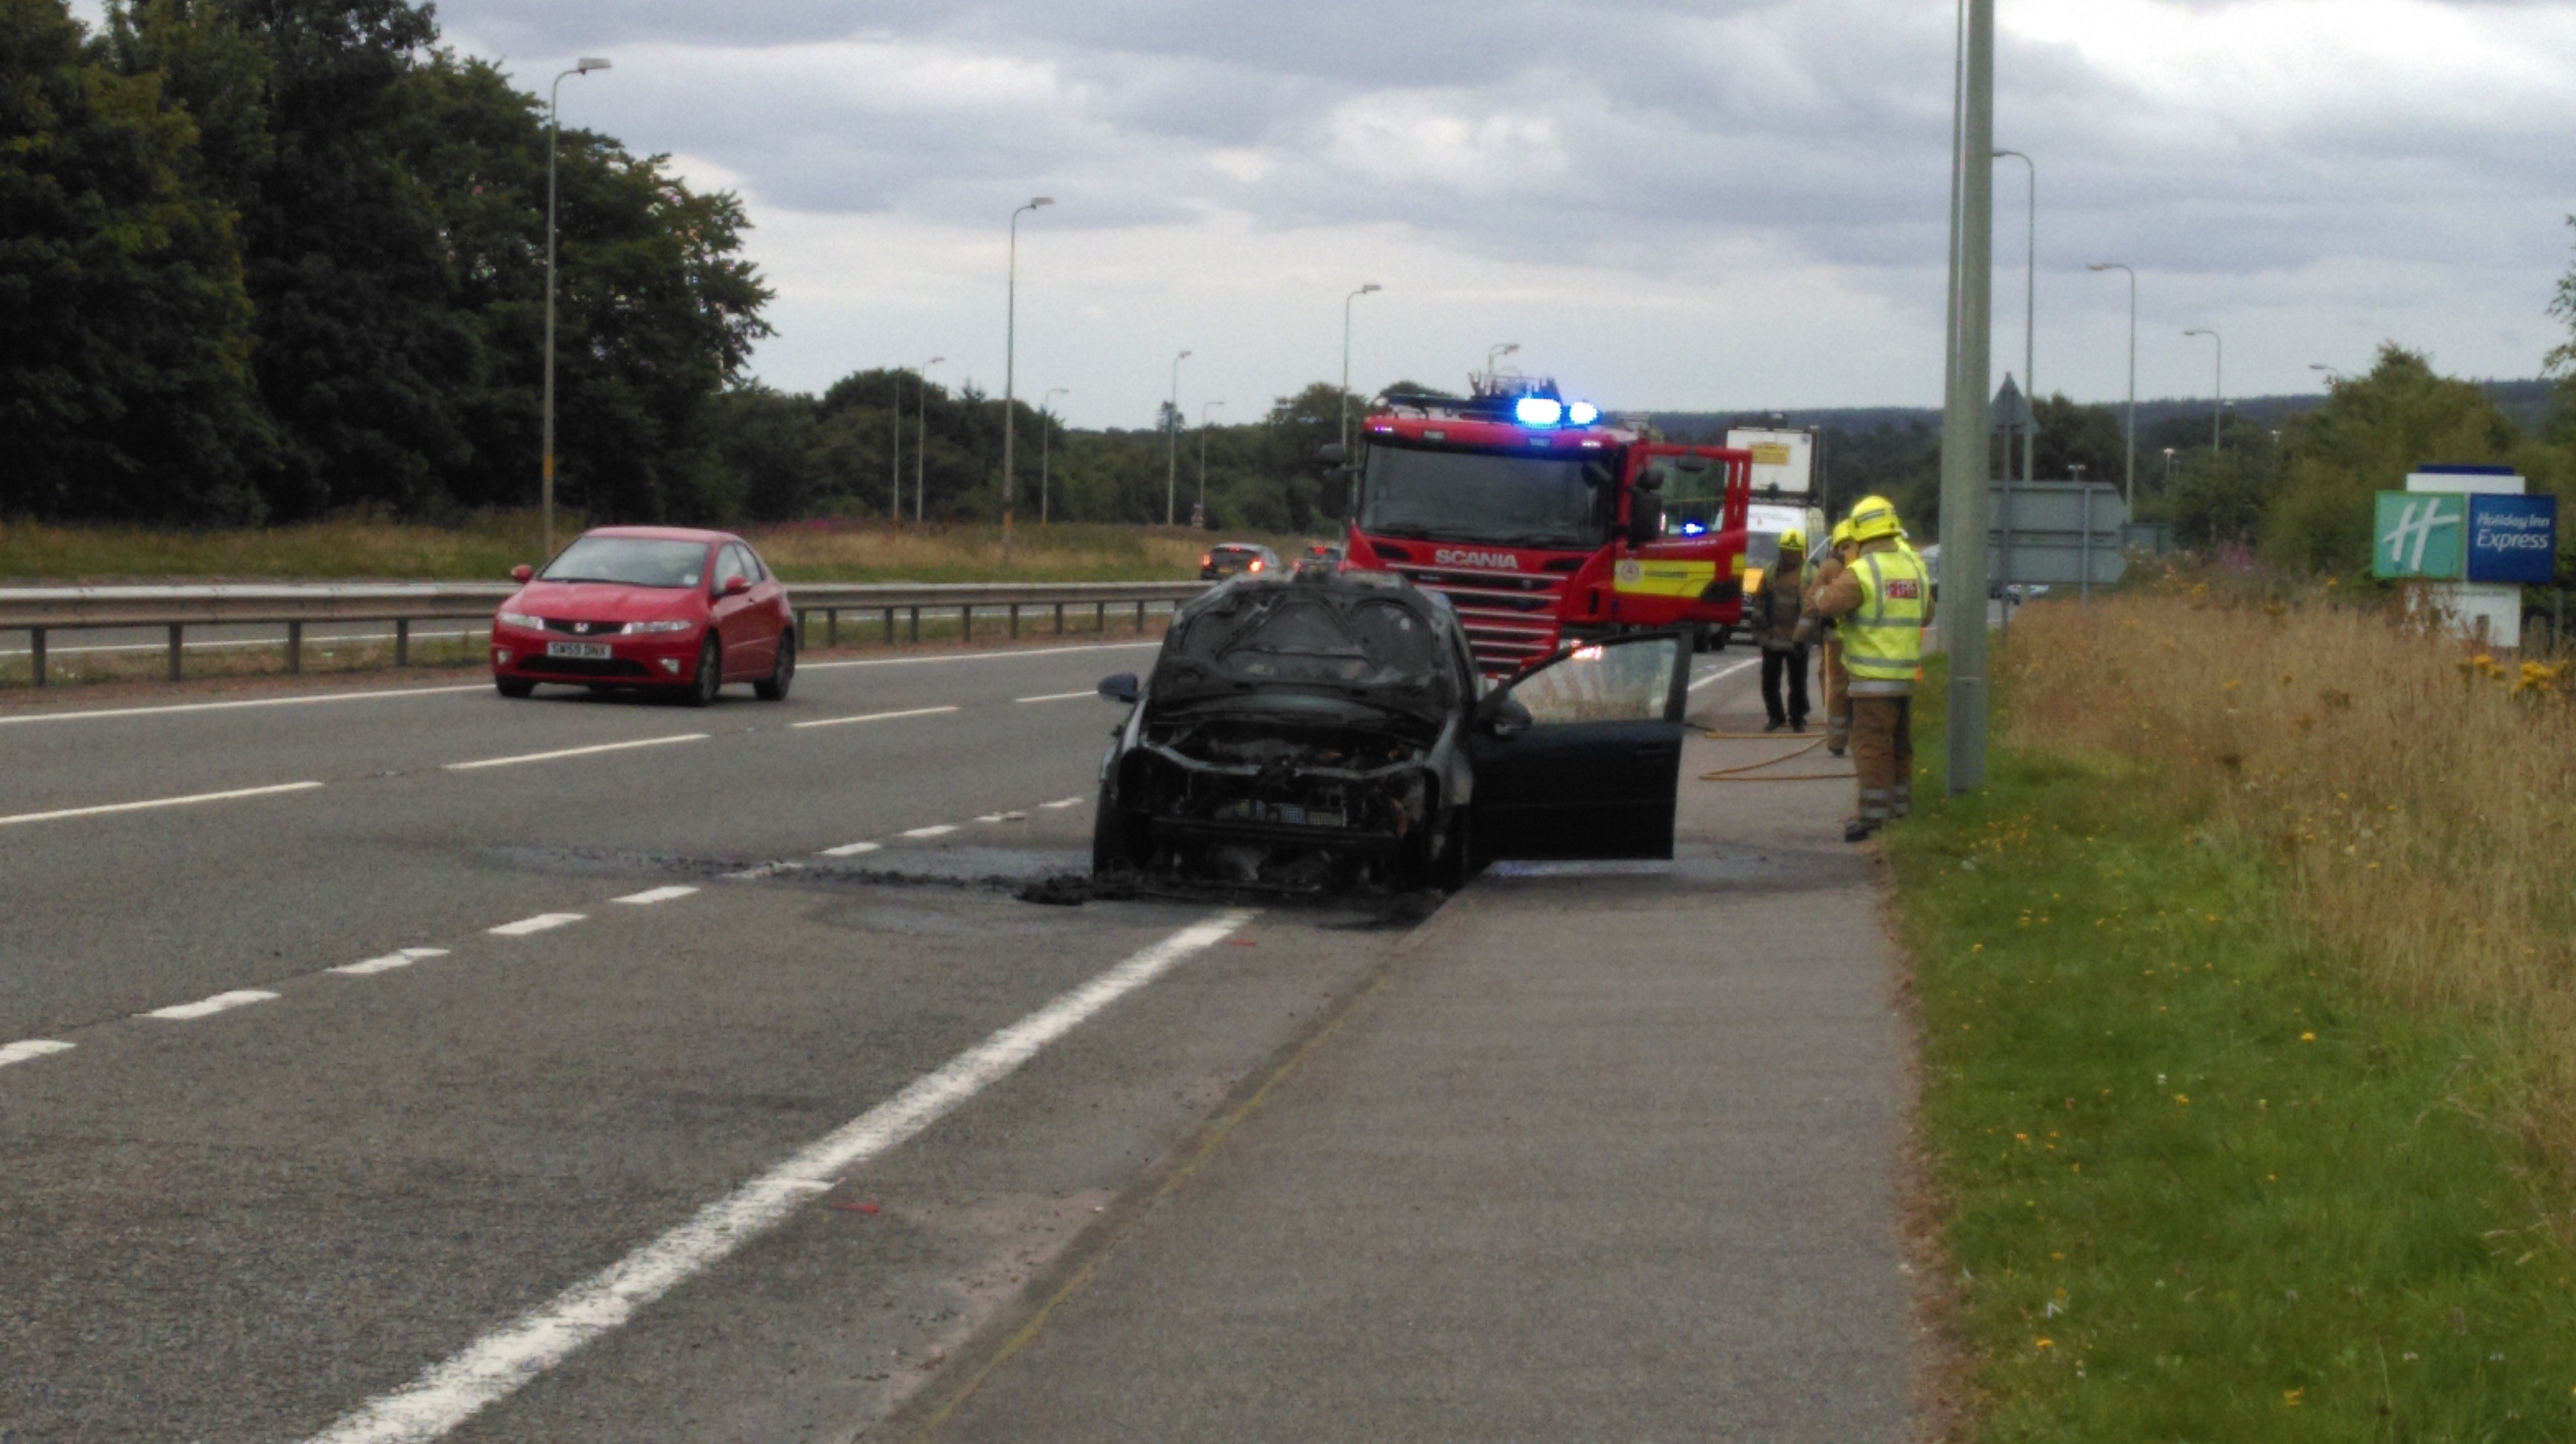 The remains of the car which caught fire on the A96